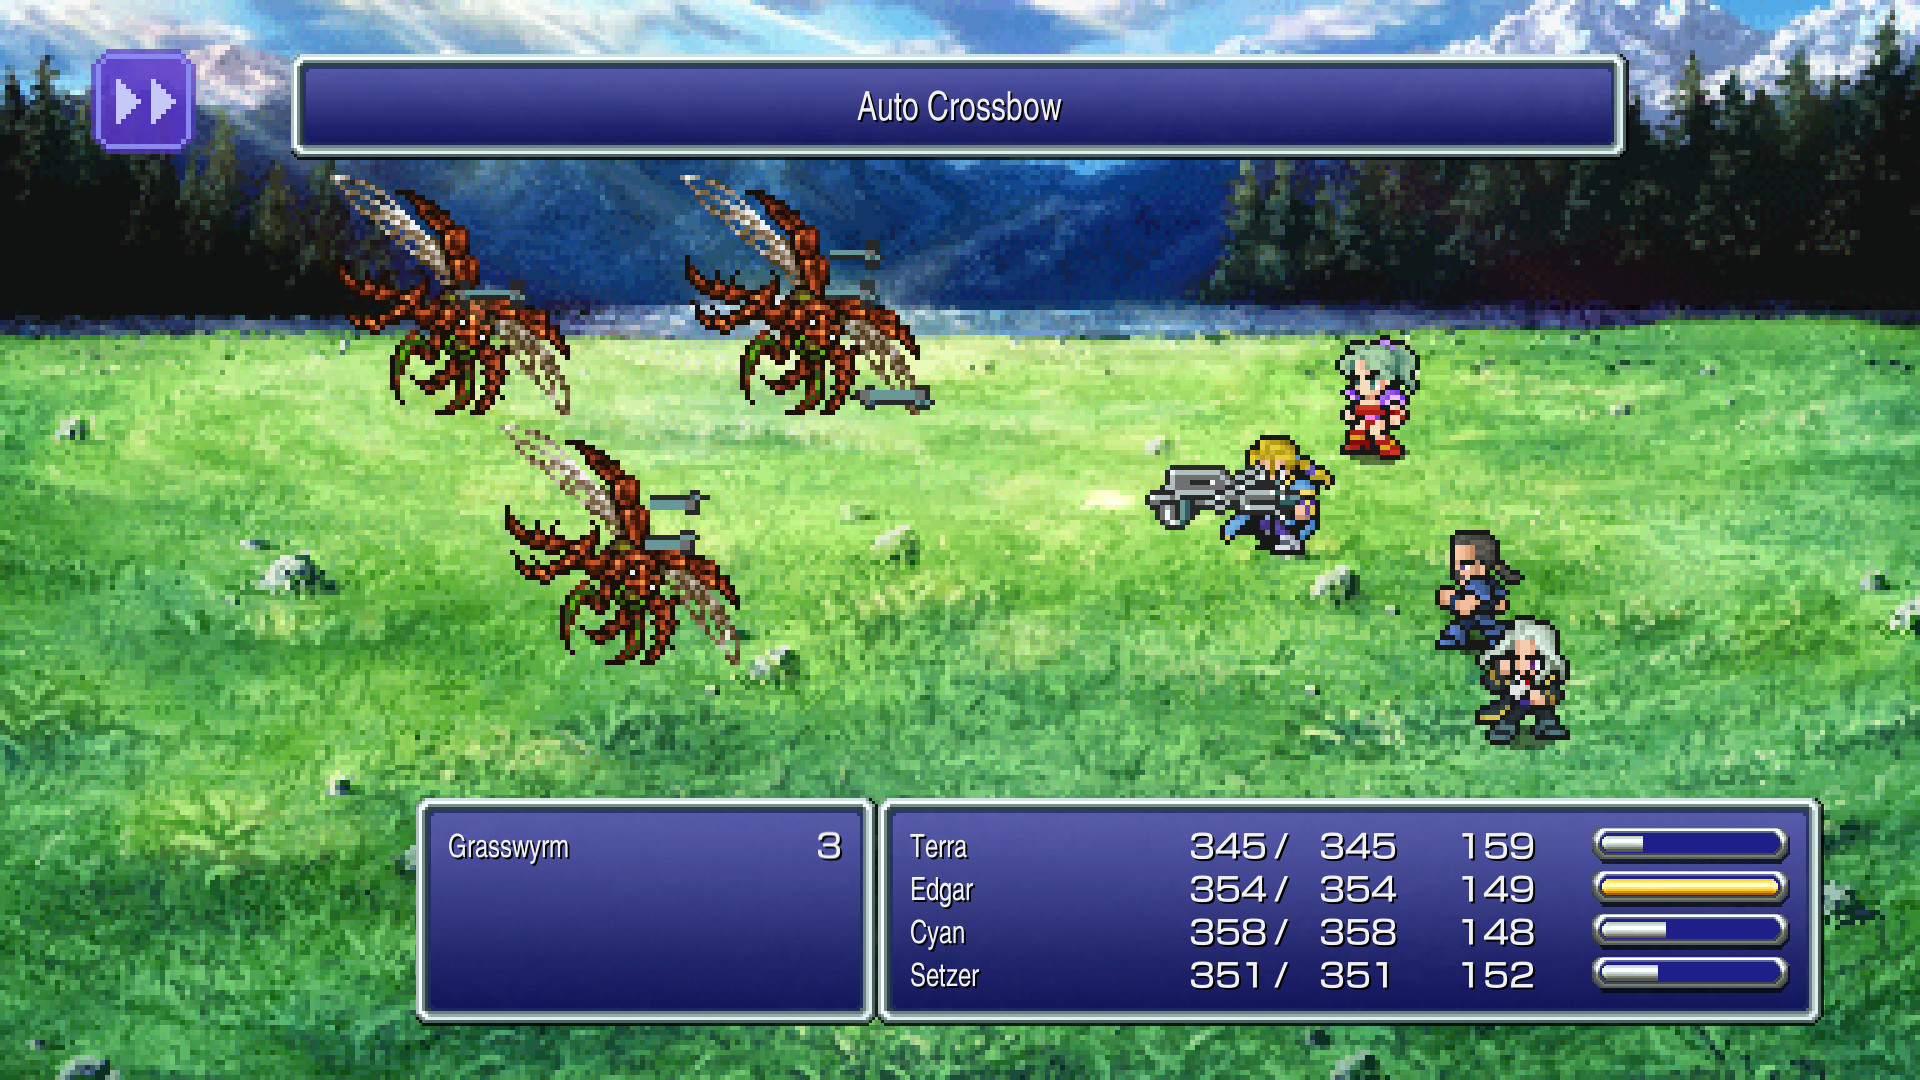 Final Fantasy VI Pixel Remaster Launches on February 23rd on PC and Mobile